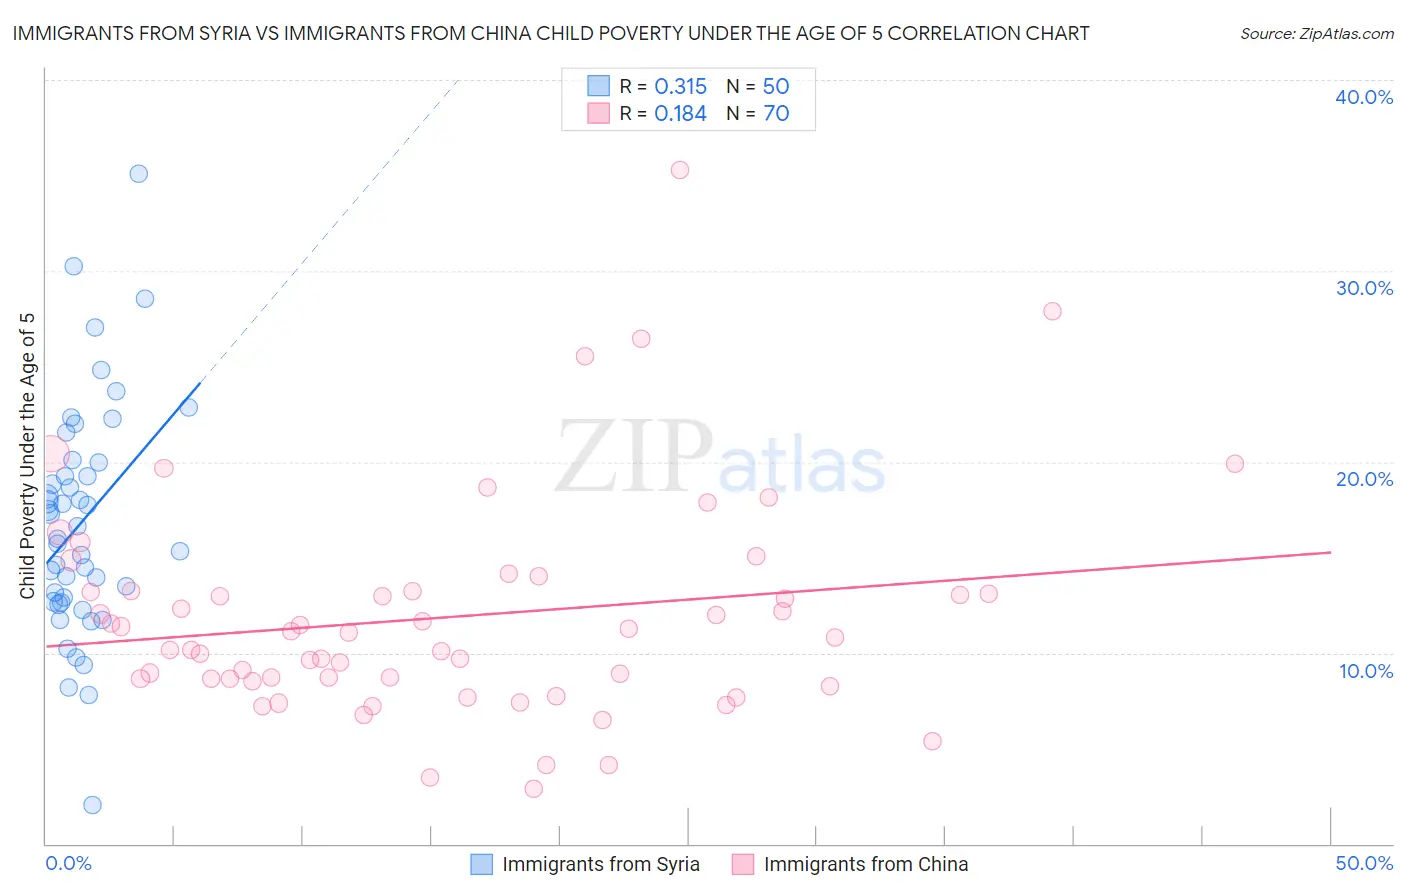 Immigrants from Syria vs Immigrants from China Child Poverty Under the Age of 5